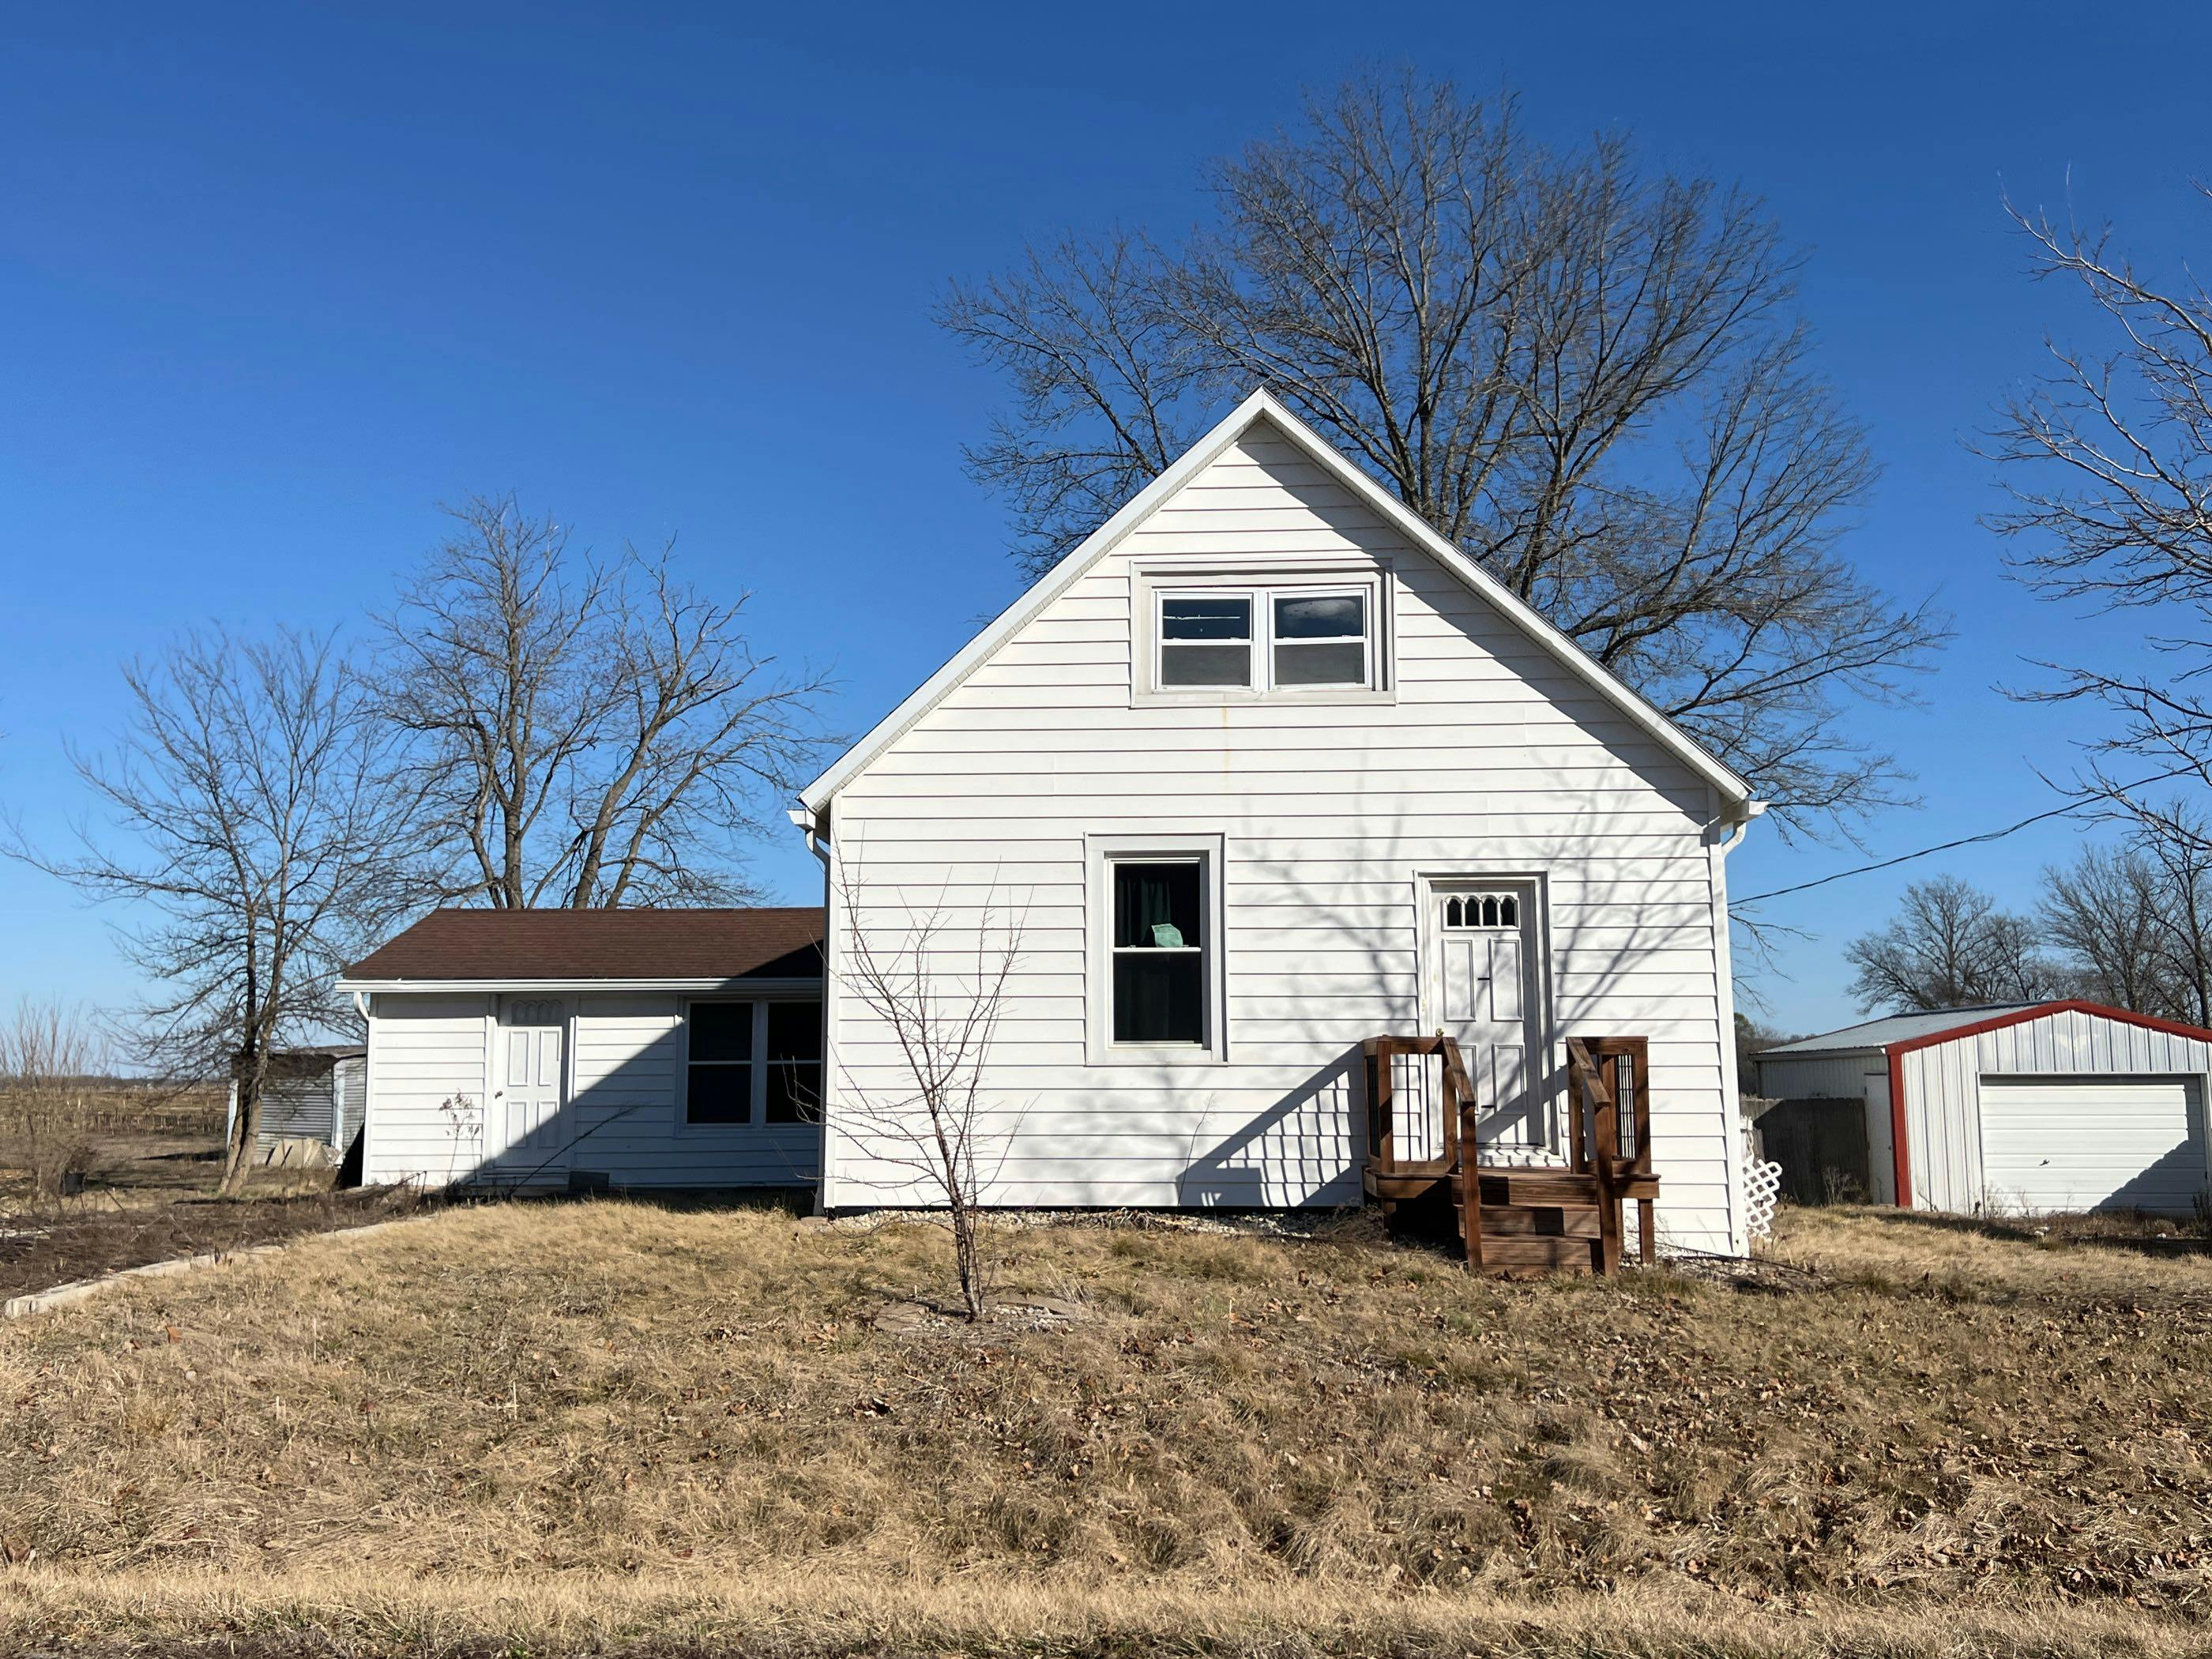 Ames Rd, Red Bud, IL 62278 #1